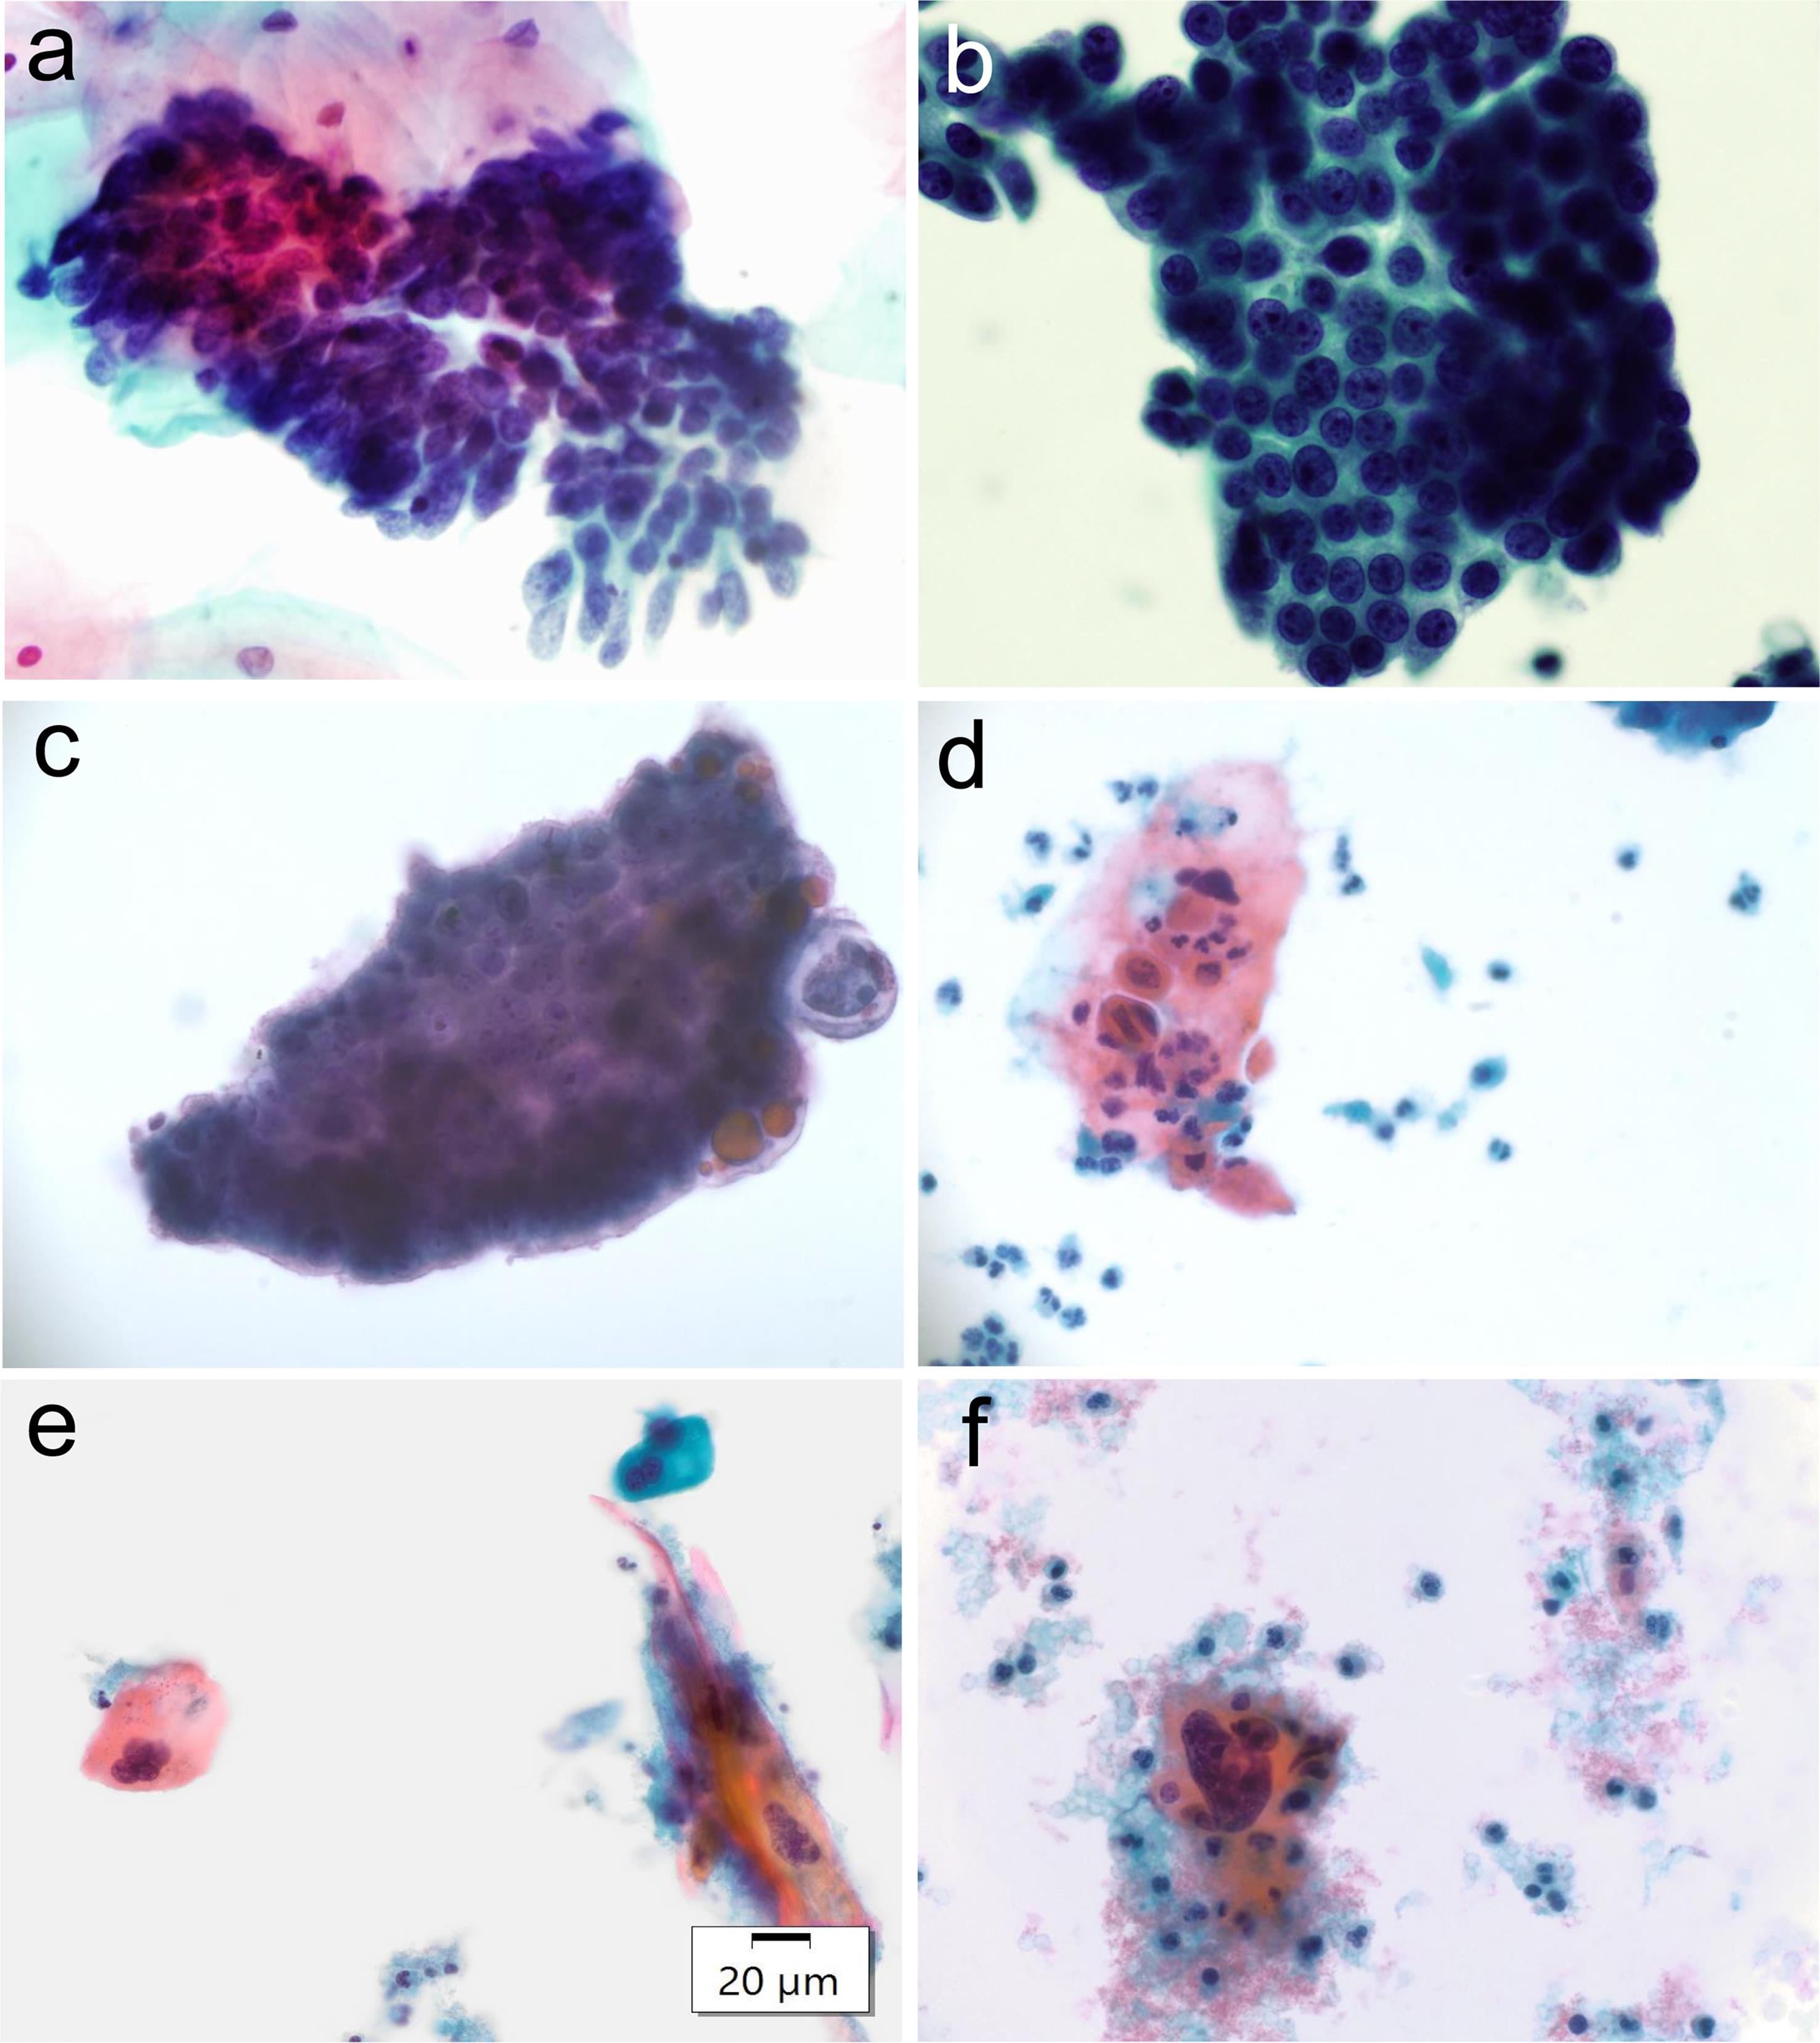 (a) Adenocarcinoma <italic>in situ</italic> with feathering endocervical glandular arrangements. (b–c) Adenocarcinoma: NOS cells forming a glandular architecture with nuclear overlapping crowding, and hyperchromasia. (d–f) Squamous cell carcinoma presenting orangeophilic tumor cells with an irregular nuclear contour, hyperchromasia, and tadpole features in the background of the tumor diathesis.